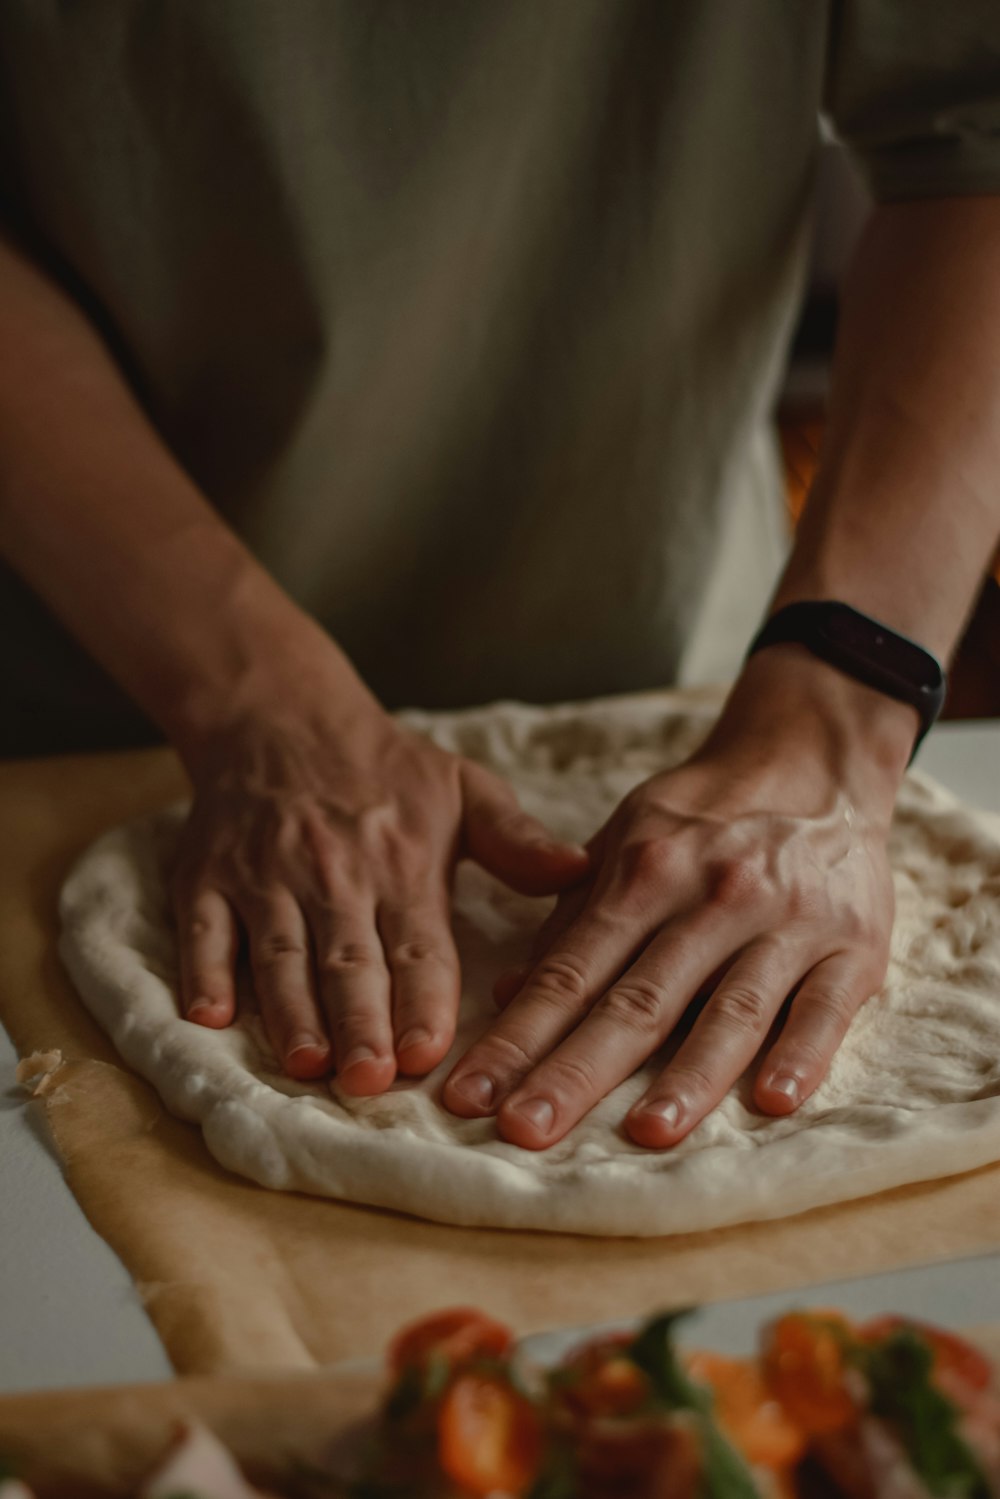 a person's hands on a plate of food